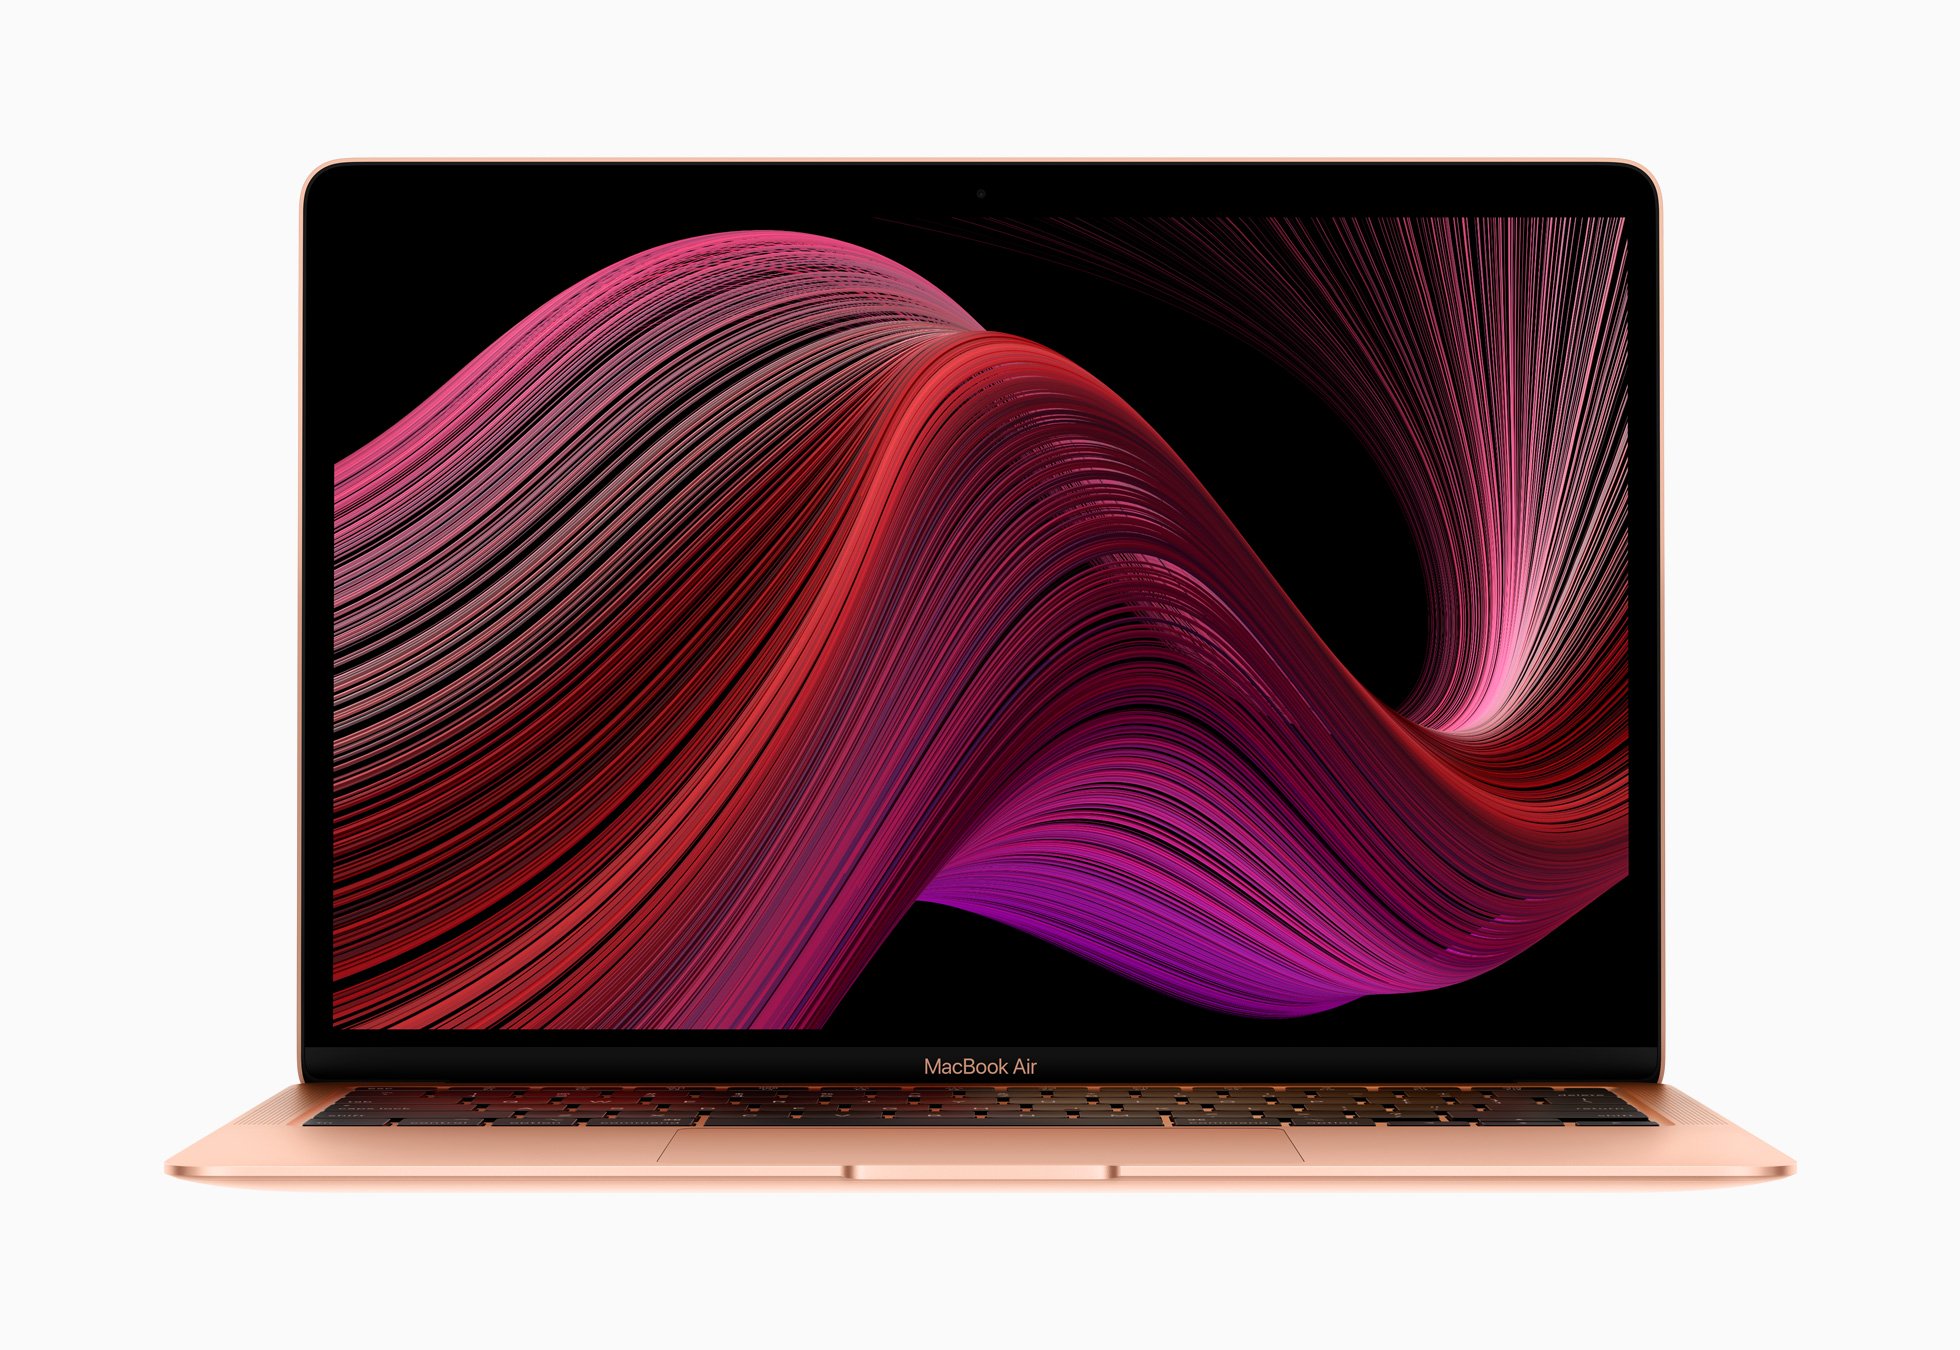 New MacBook Air Announced With Magic Keyboard, Up to 2x Faster Performance, and Lower $999 Starting Price